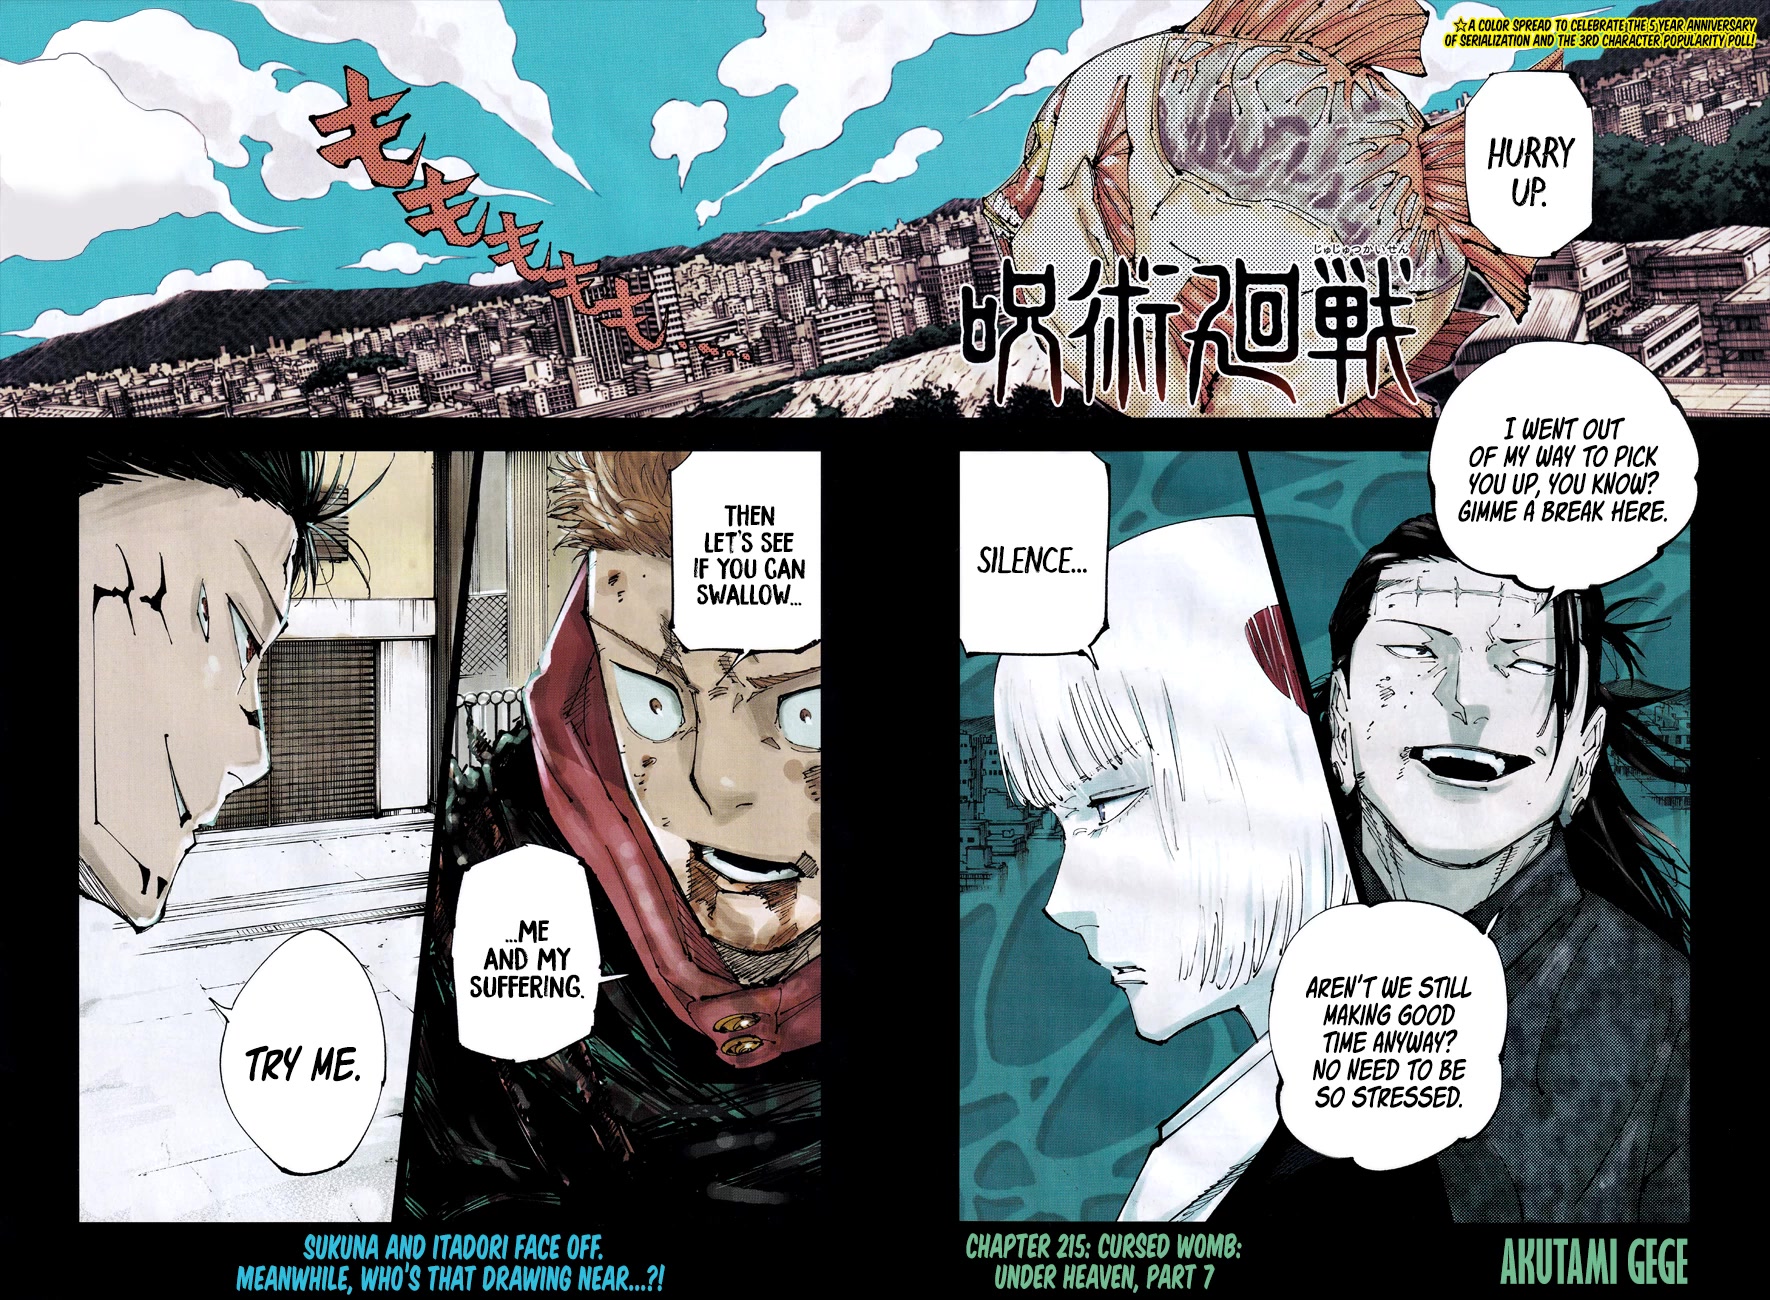 Jujutsu Kaisen Chapter 215: Cursed Womb: Under Heaven, Part 7 - Picture 3